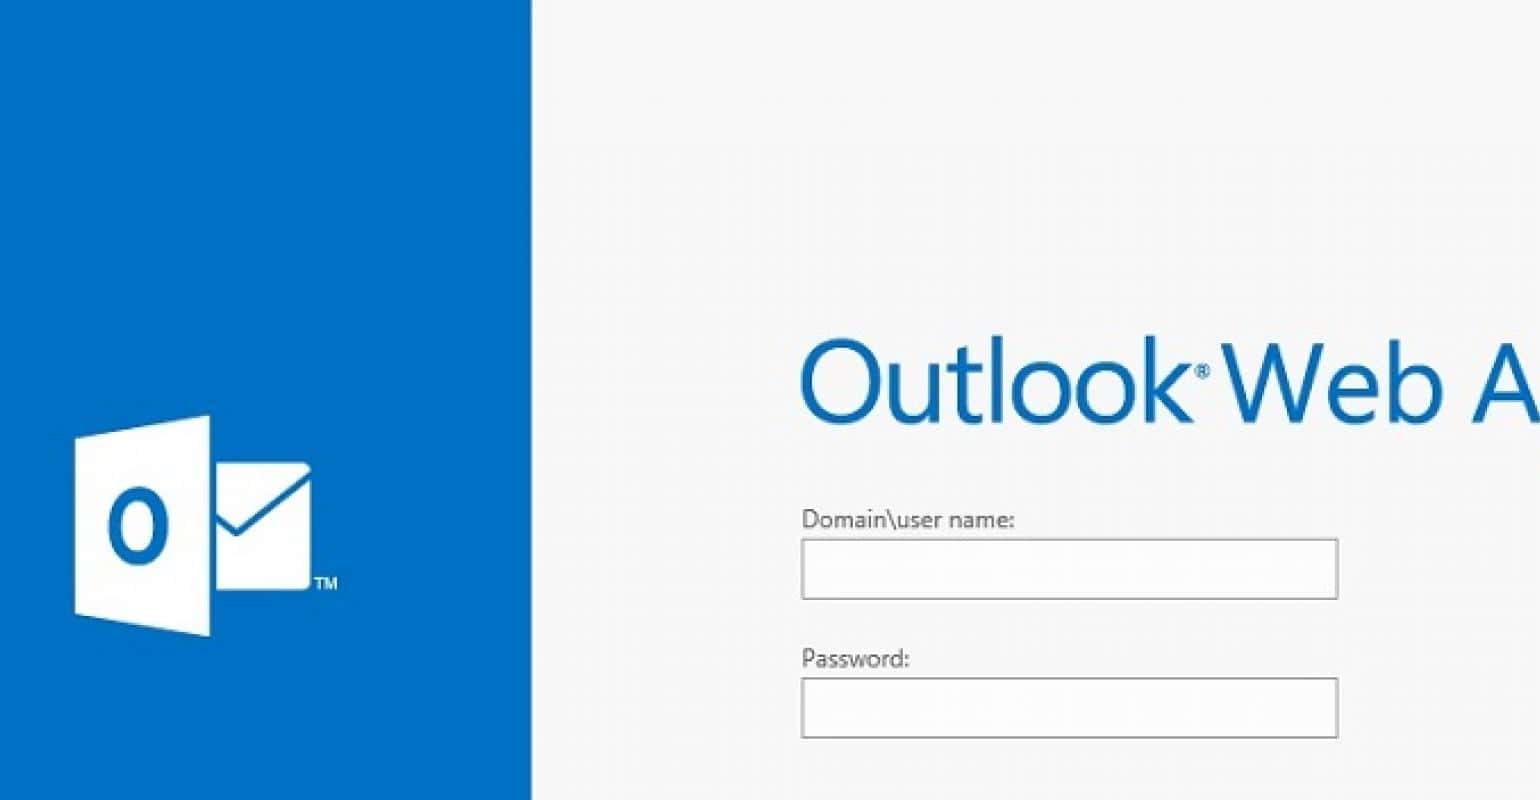 Outlook webmail support